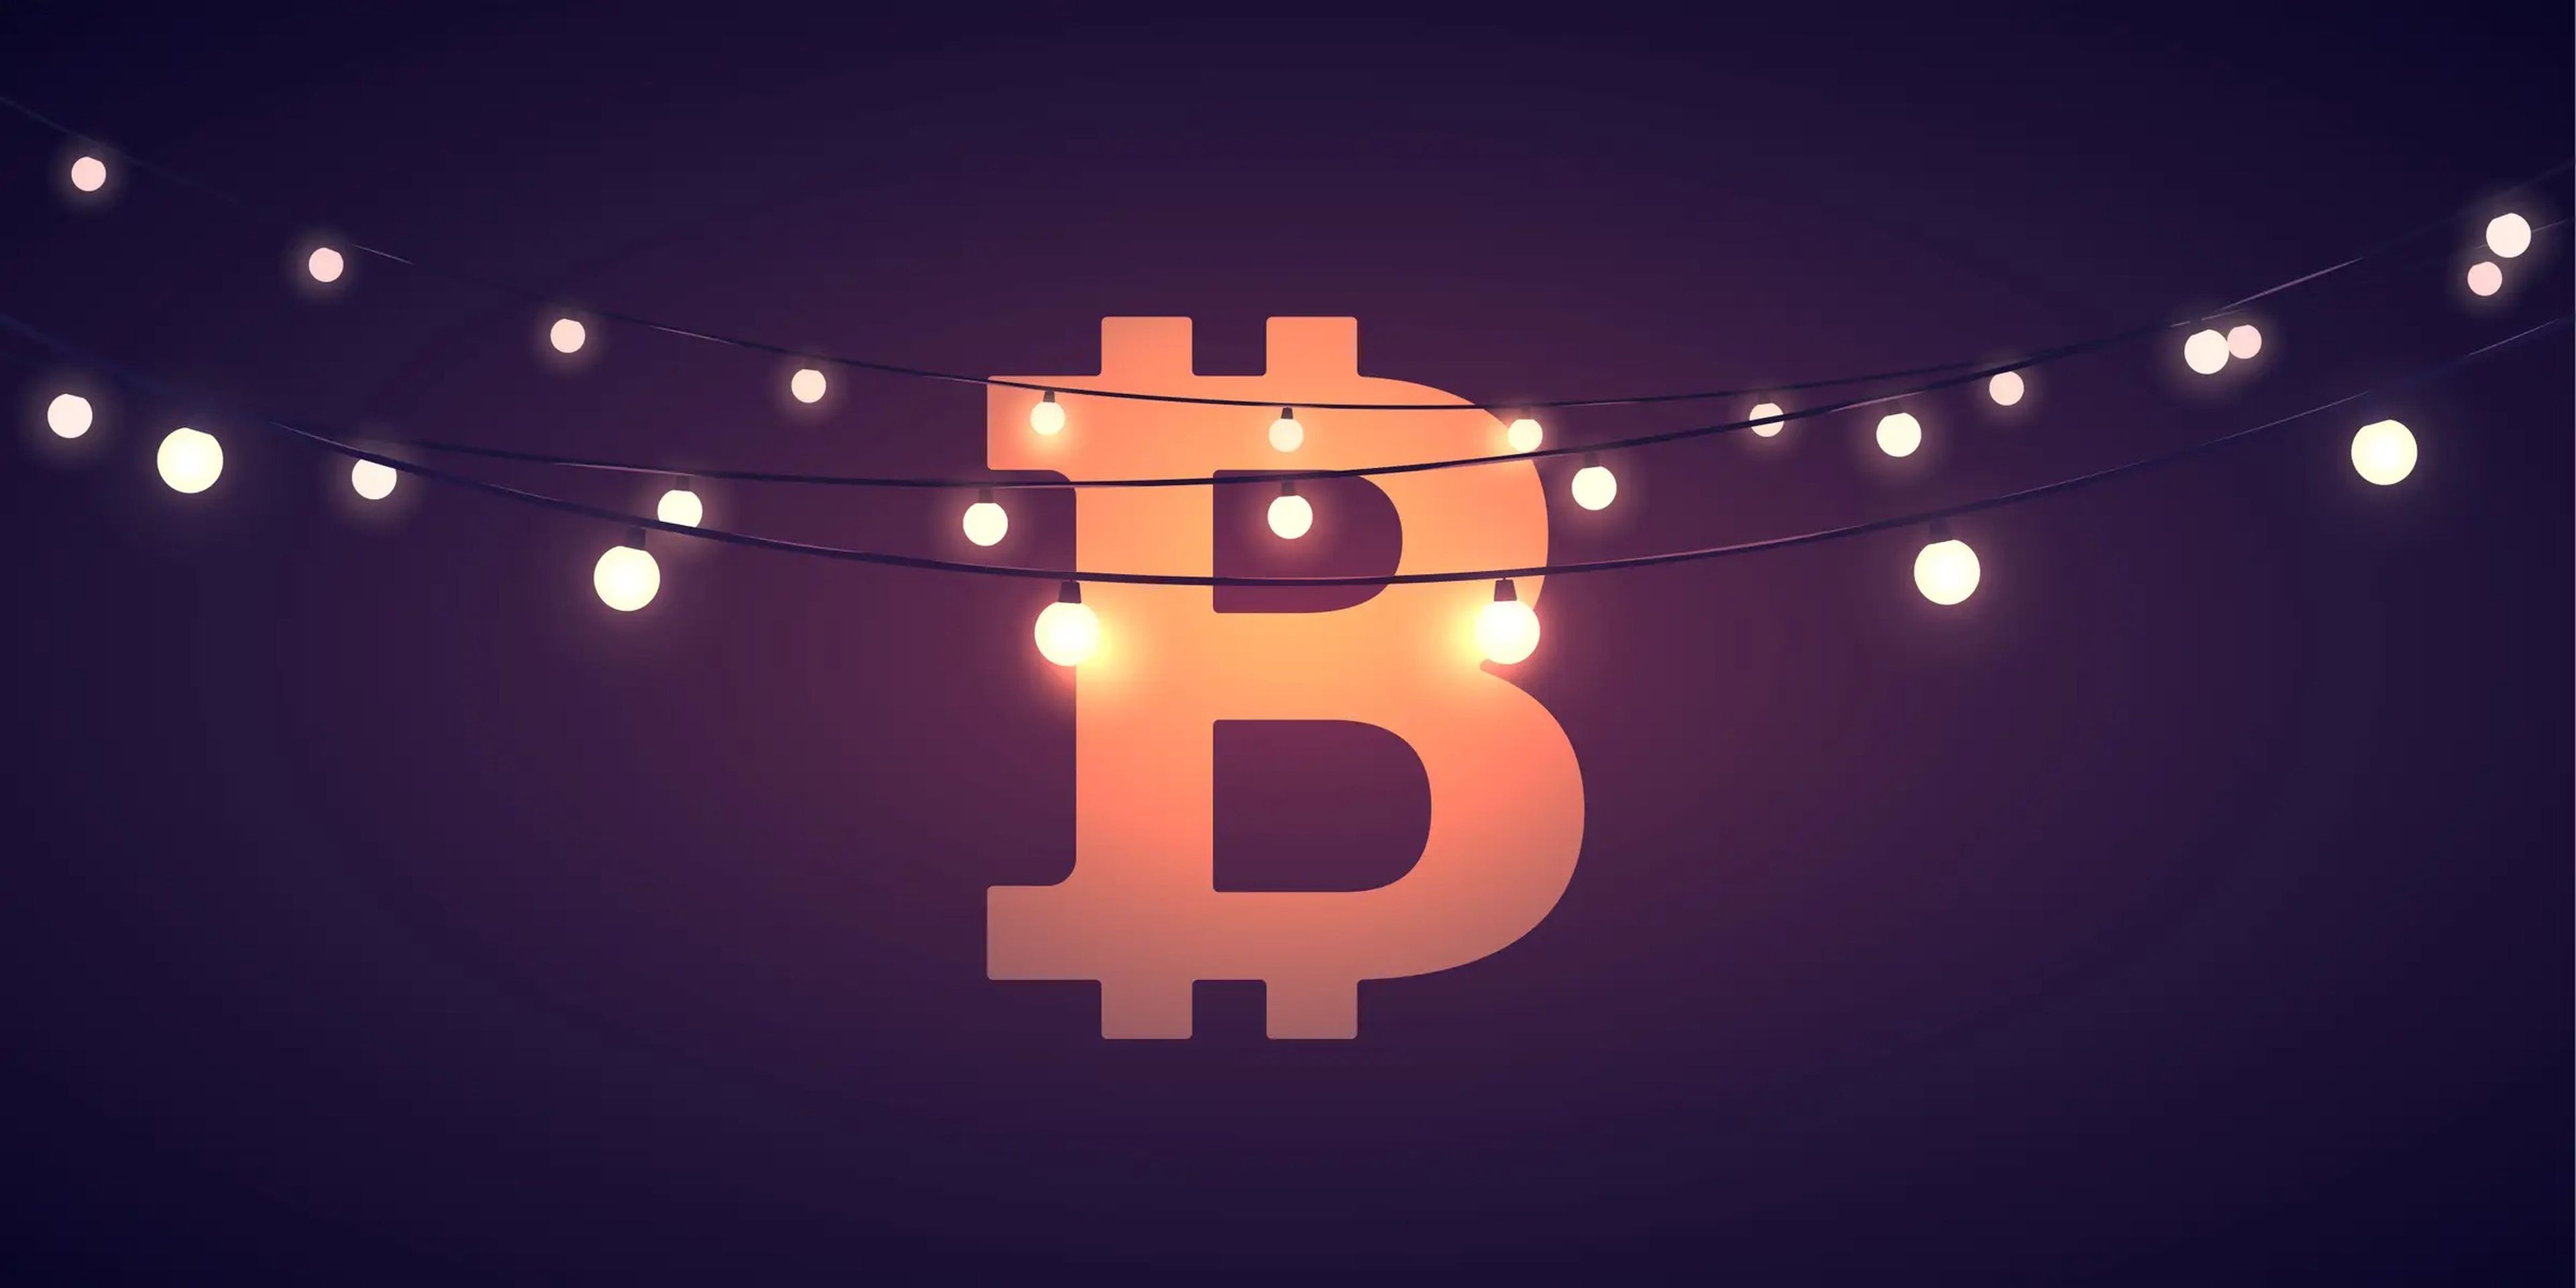 Bitcoin digital currency sign with ligths vector illustration